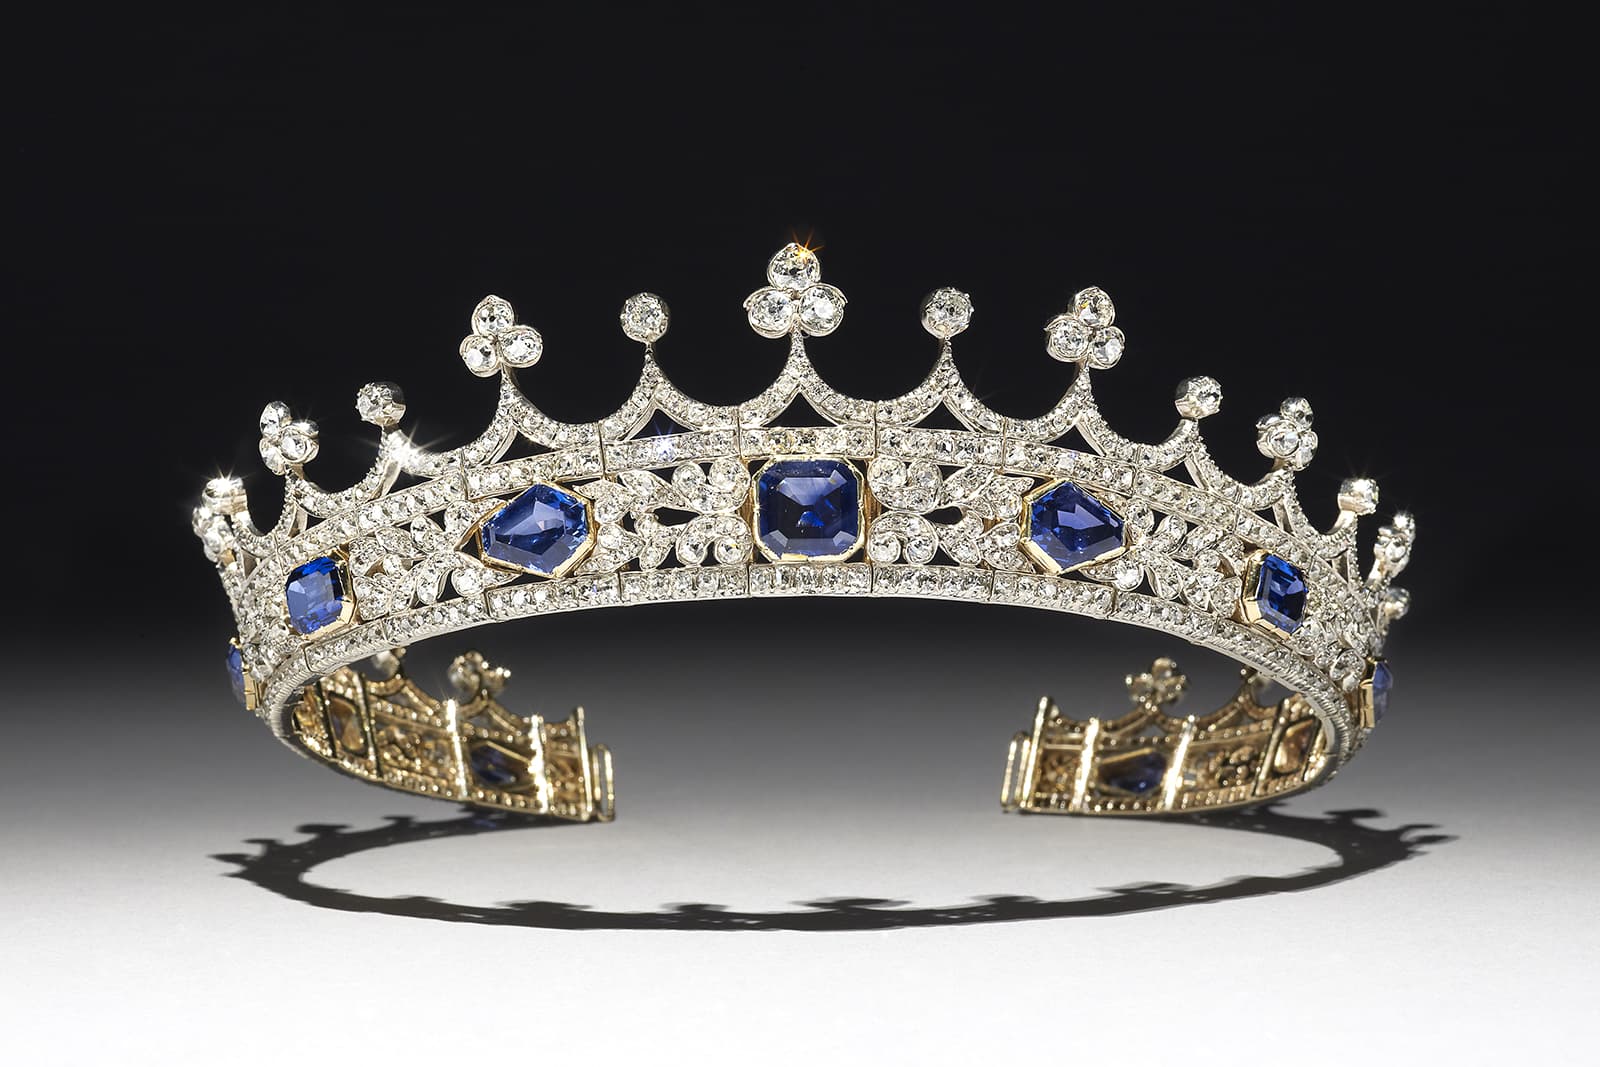 A sapphire and diamond coronet in the Gothic taste, commissioned by Prince Albert as a gift to Queen Victoria. 1840-42. Image courtesy of Wartski.